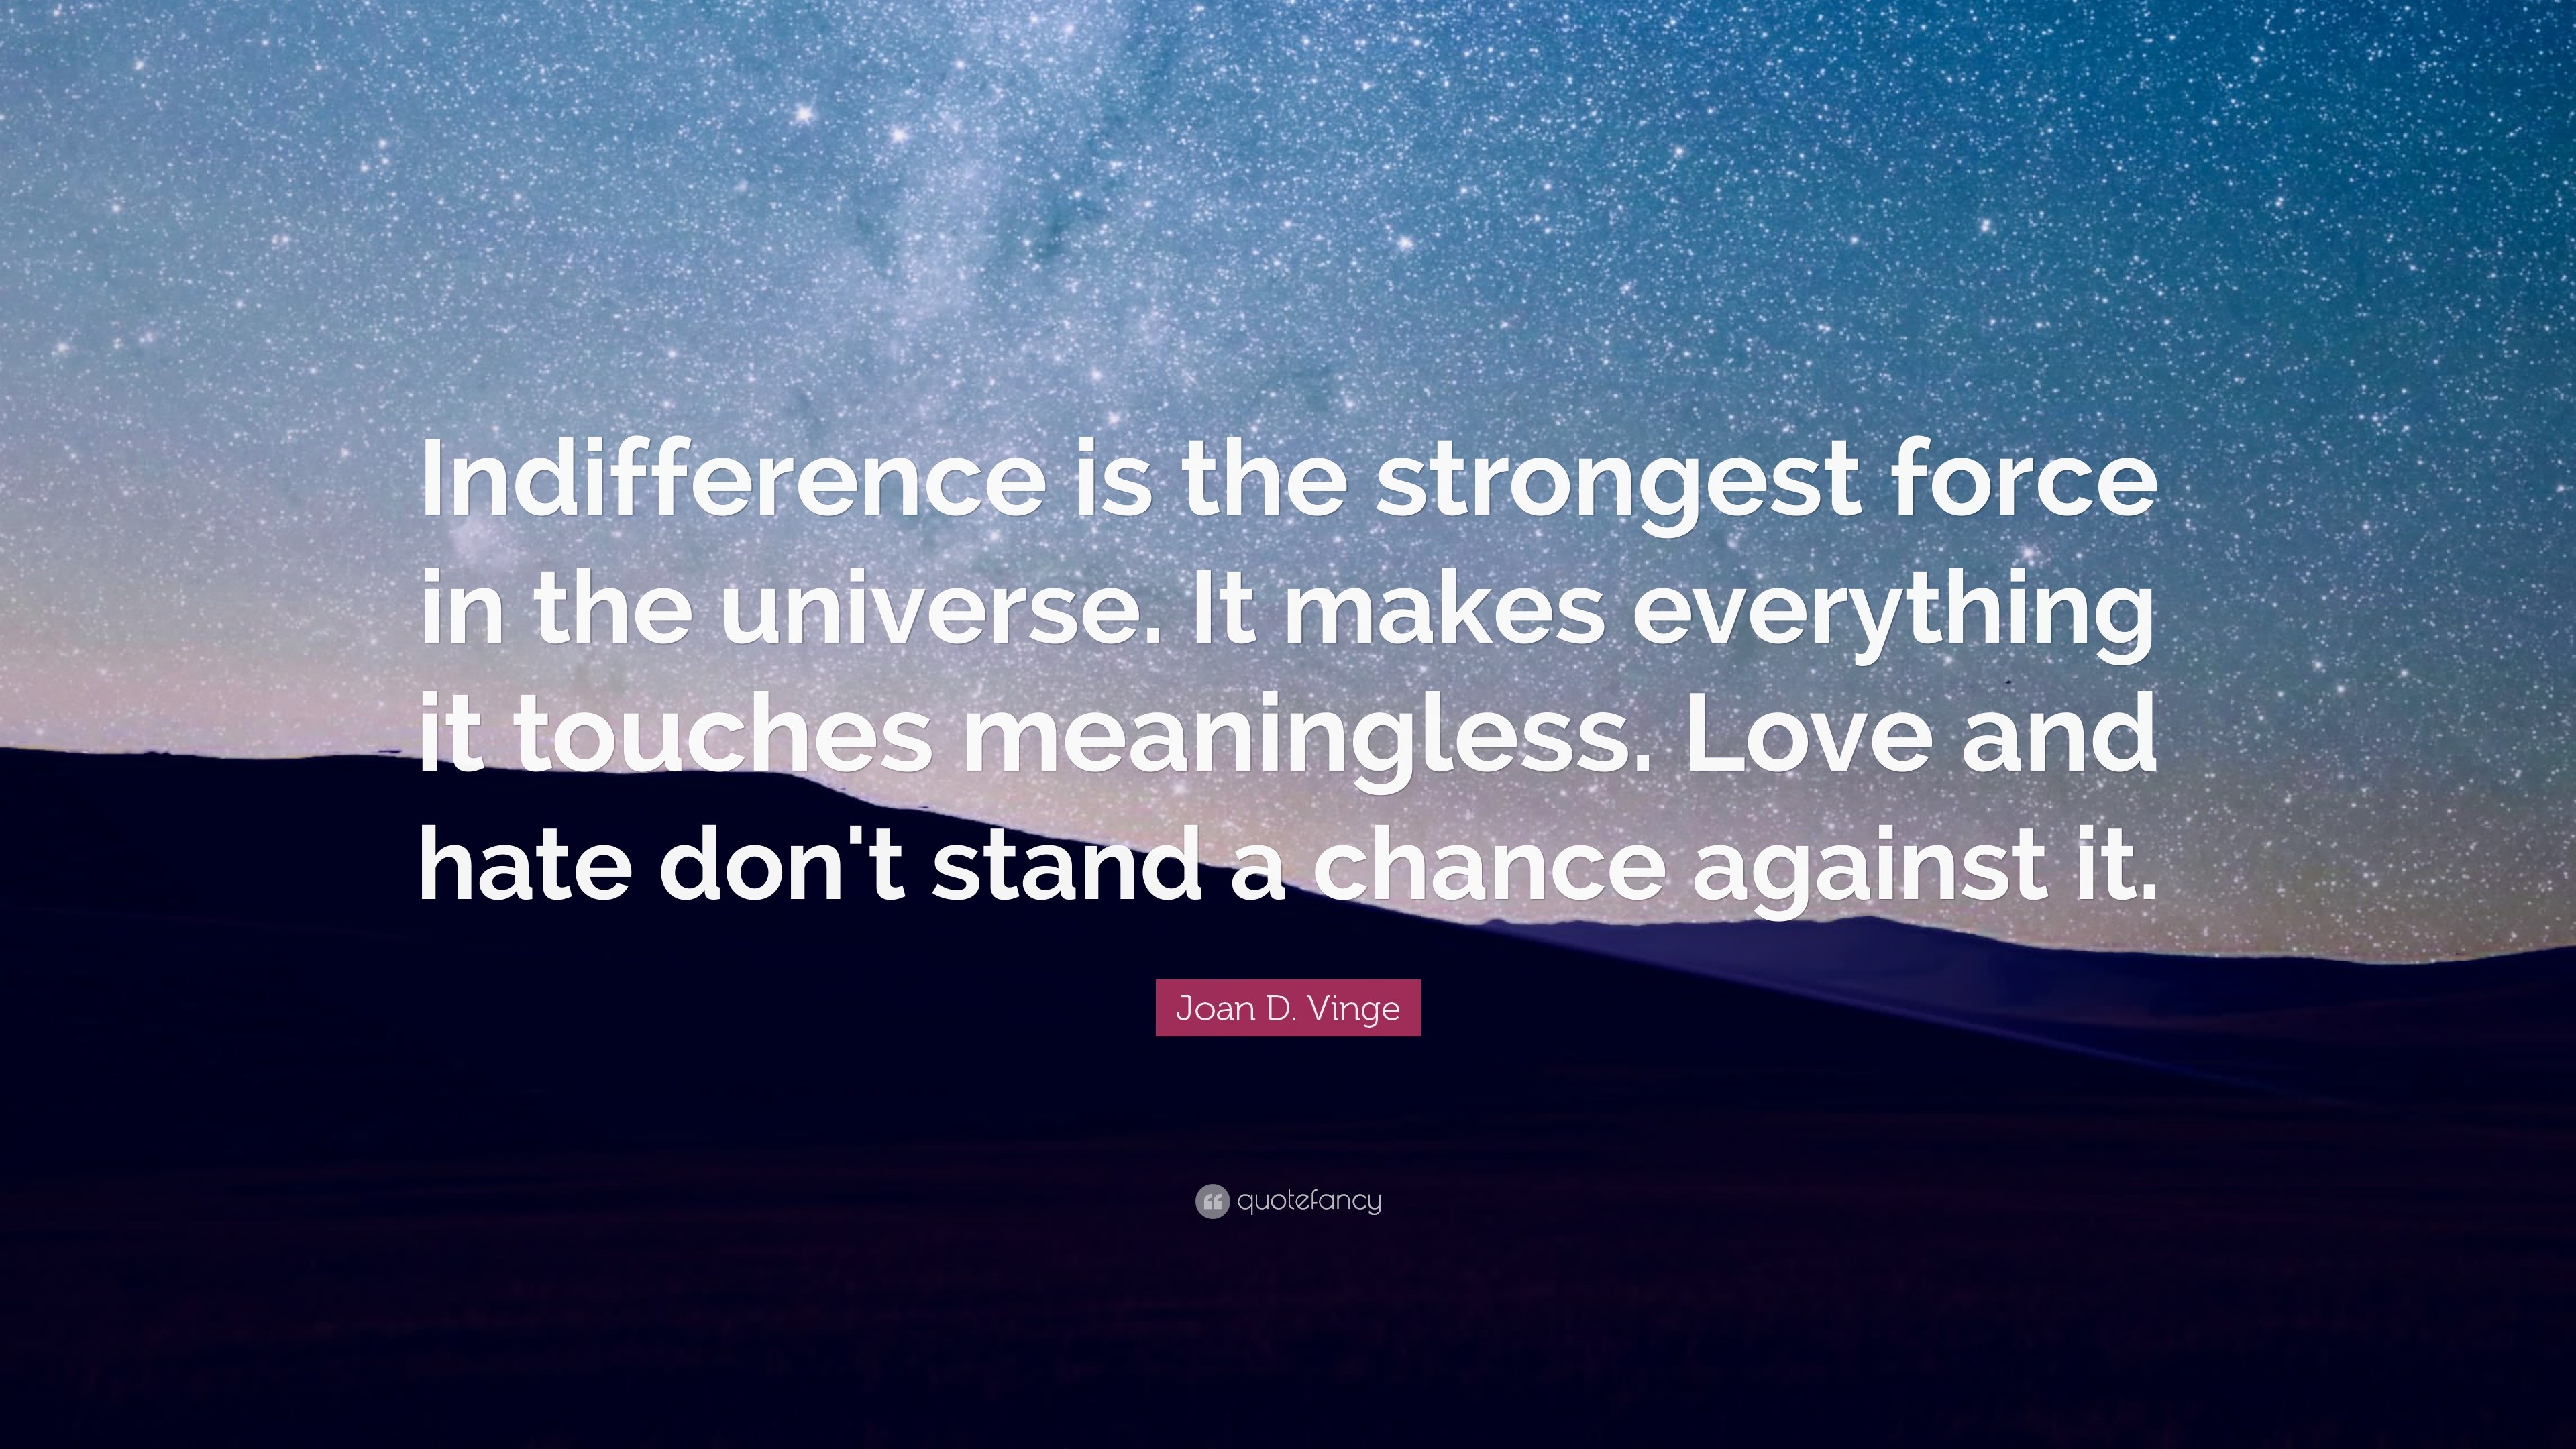 Joan D Vinge Quote “Indifference is the strongest force in the universe